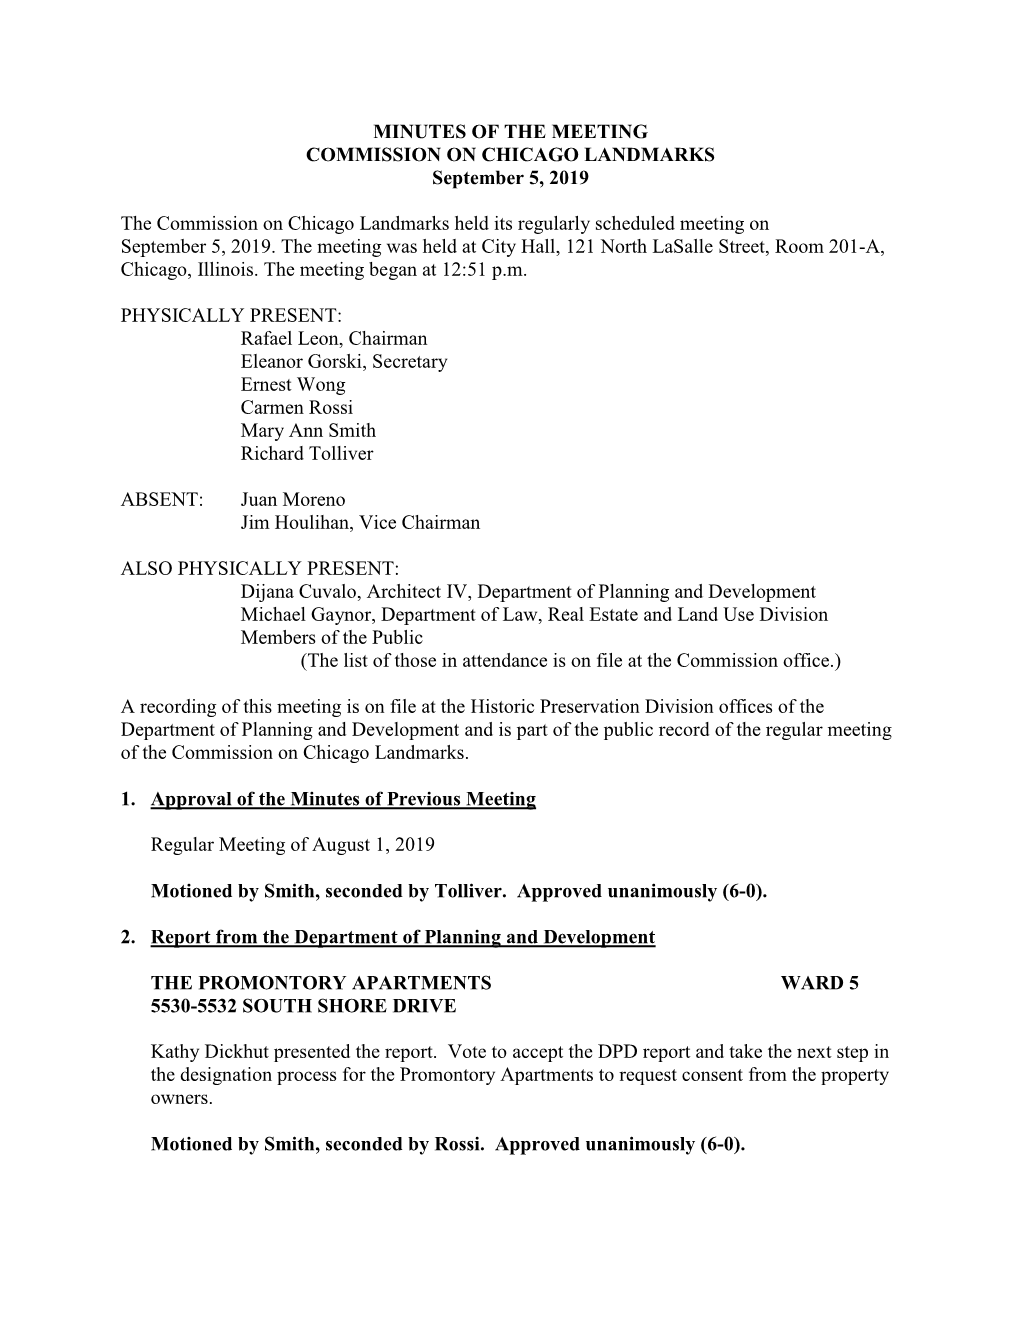 MINUTES of the MEETING COMMISSION on CHICAGO LANDMARKS September 5, 2019